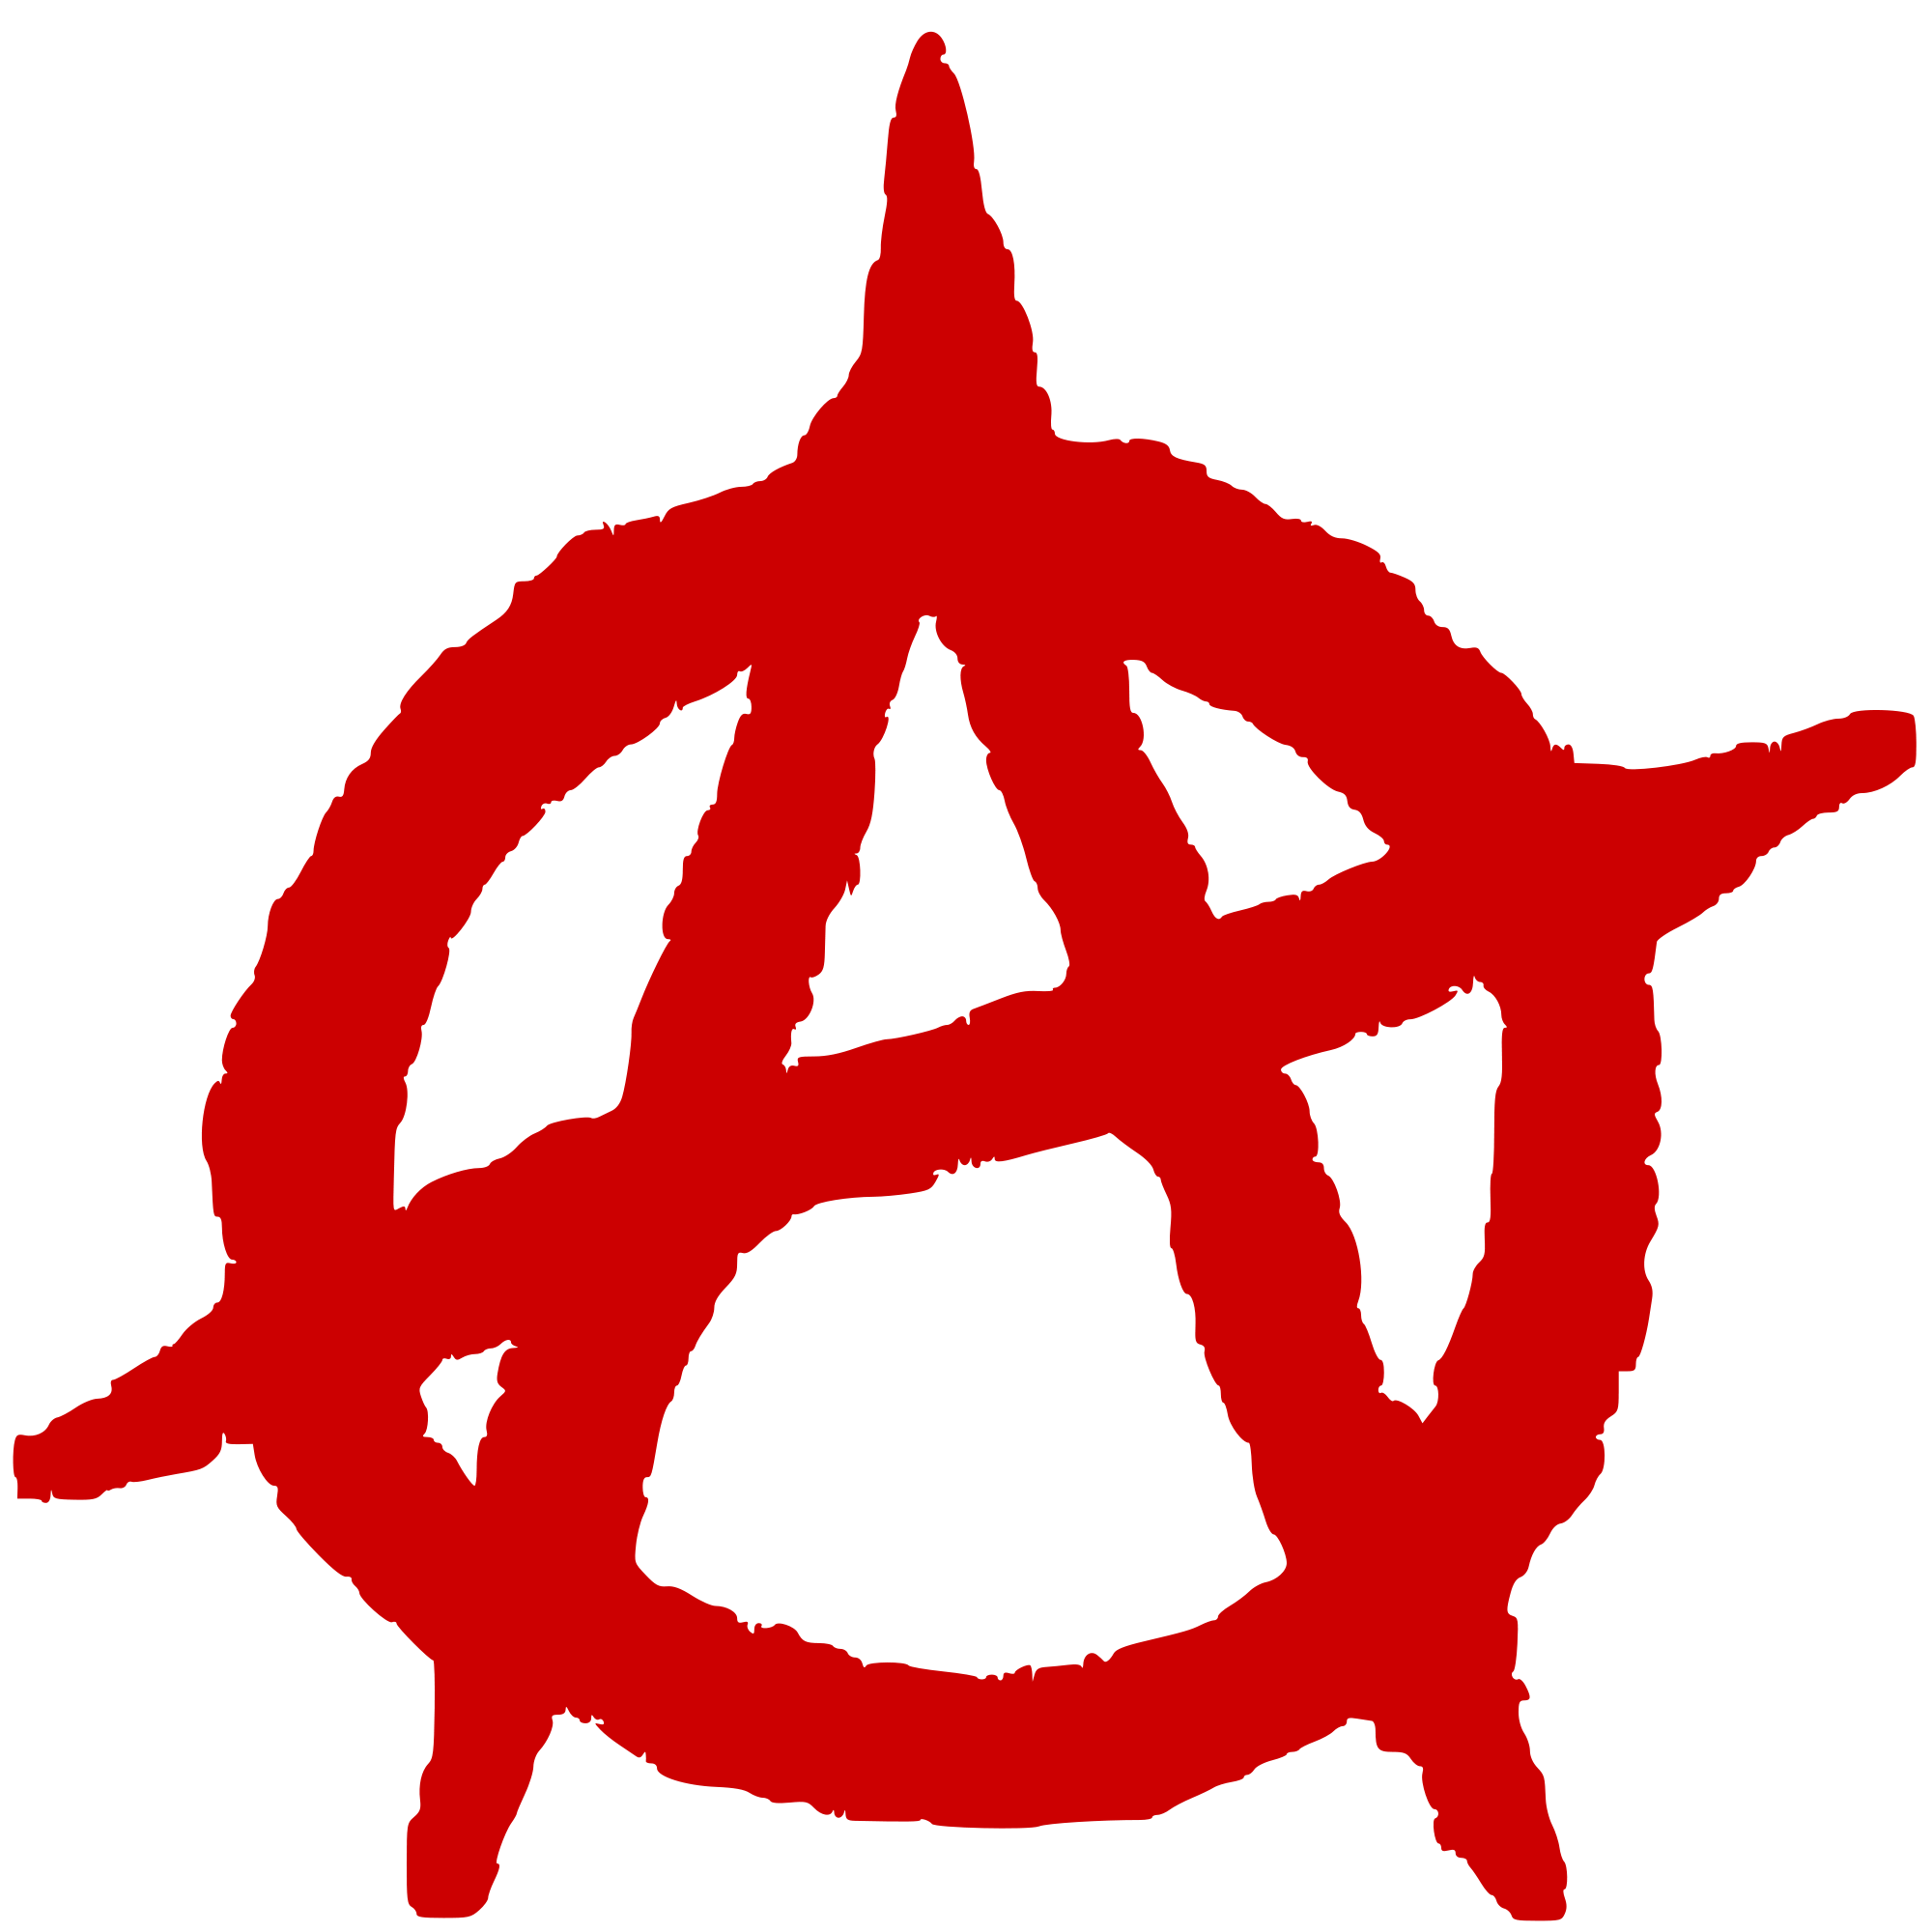 Logo Anarchy Us Png Hdpng.com 2000 - Anarchy Us, Transparent background PNG HD thumbnail